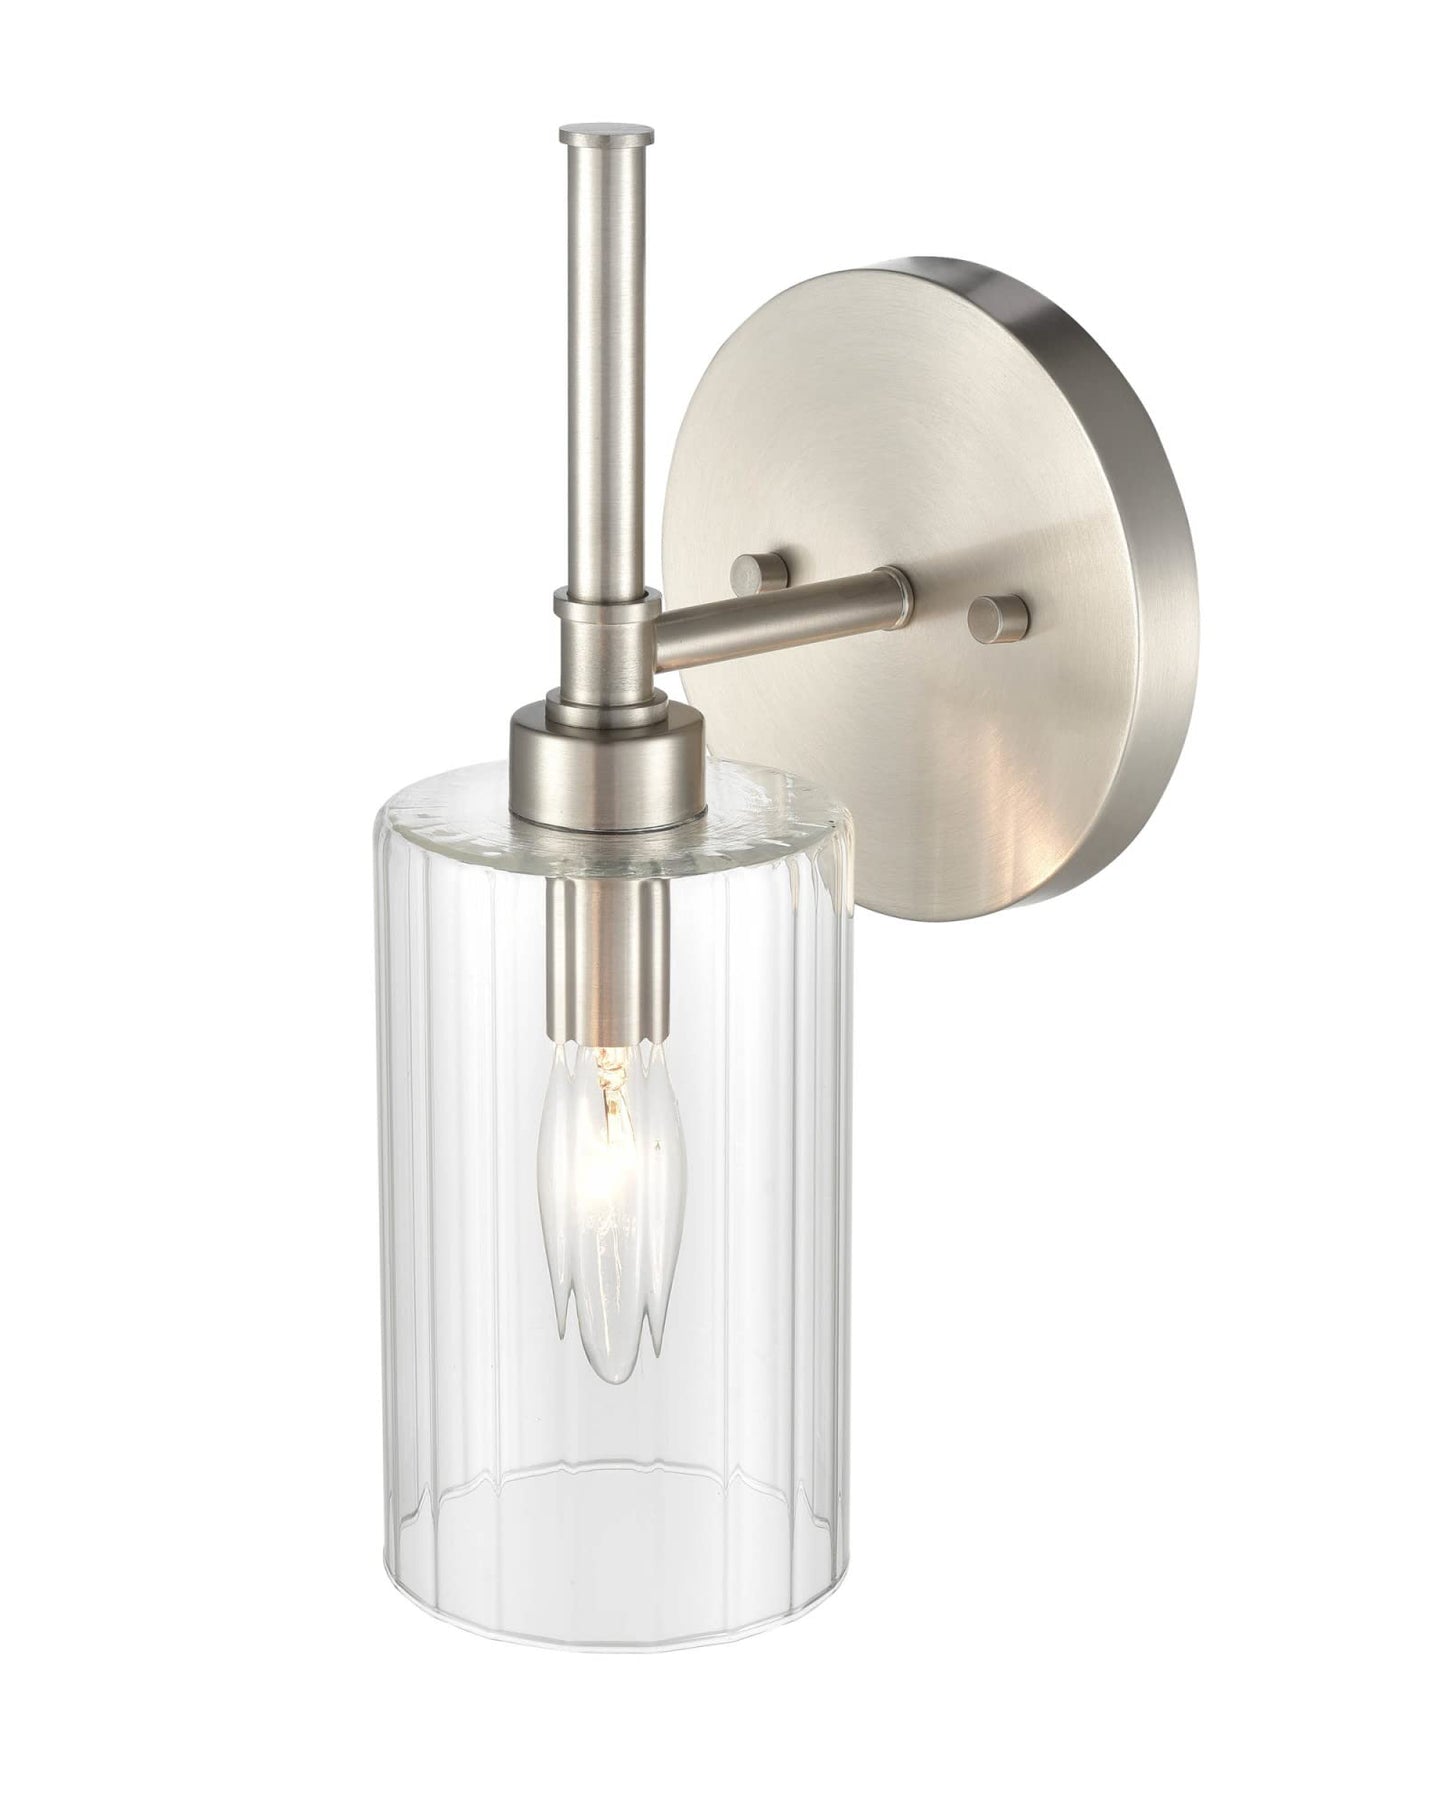 Millennium Lighting Chastine 1 Light Wall Sconce in Brushed Nickel